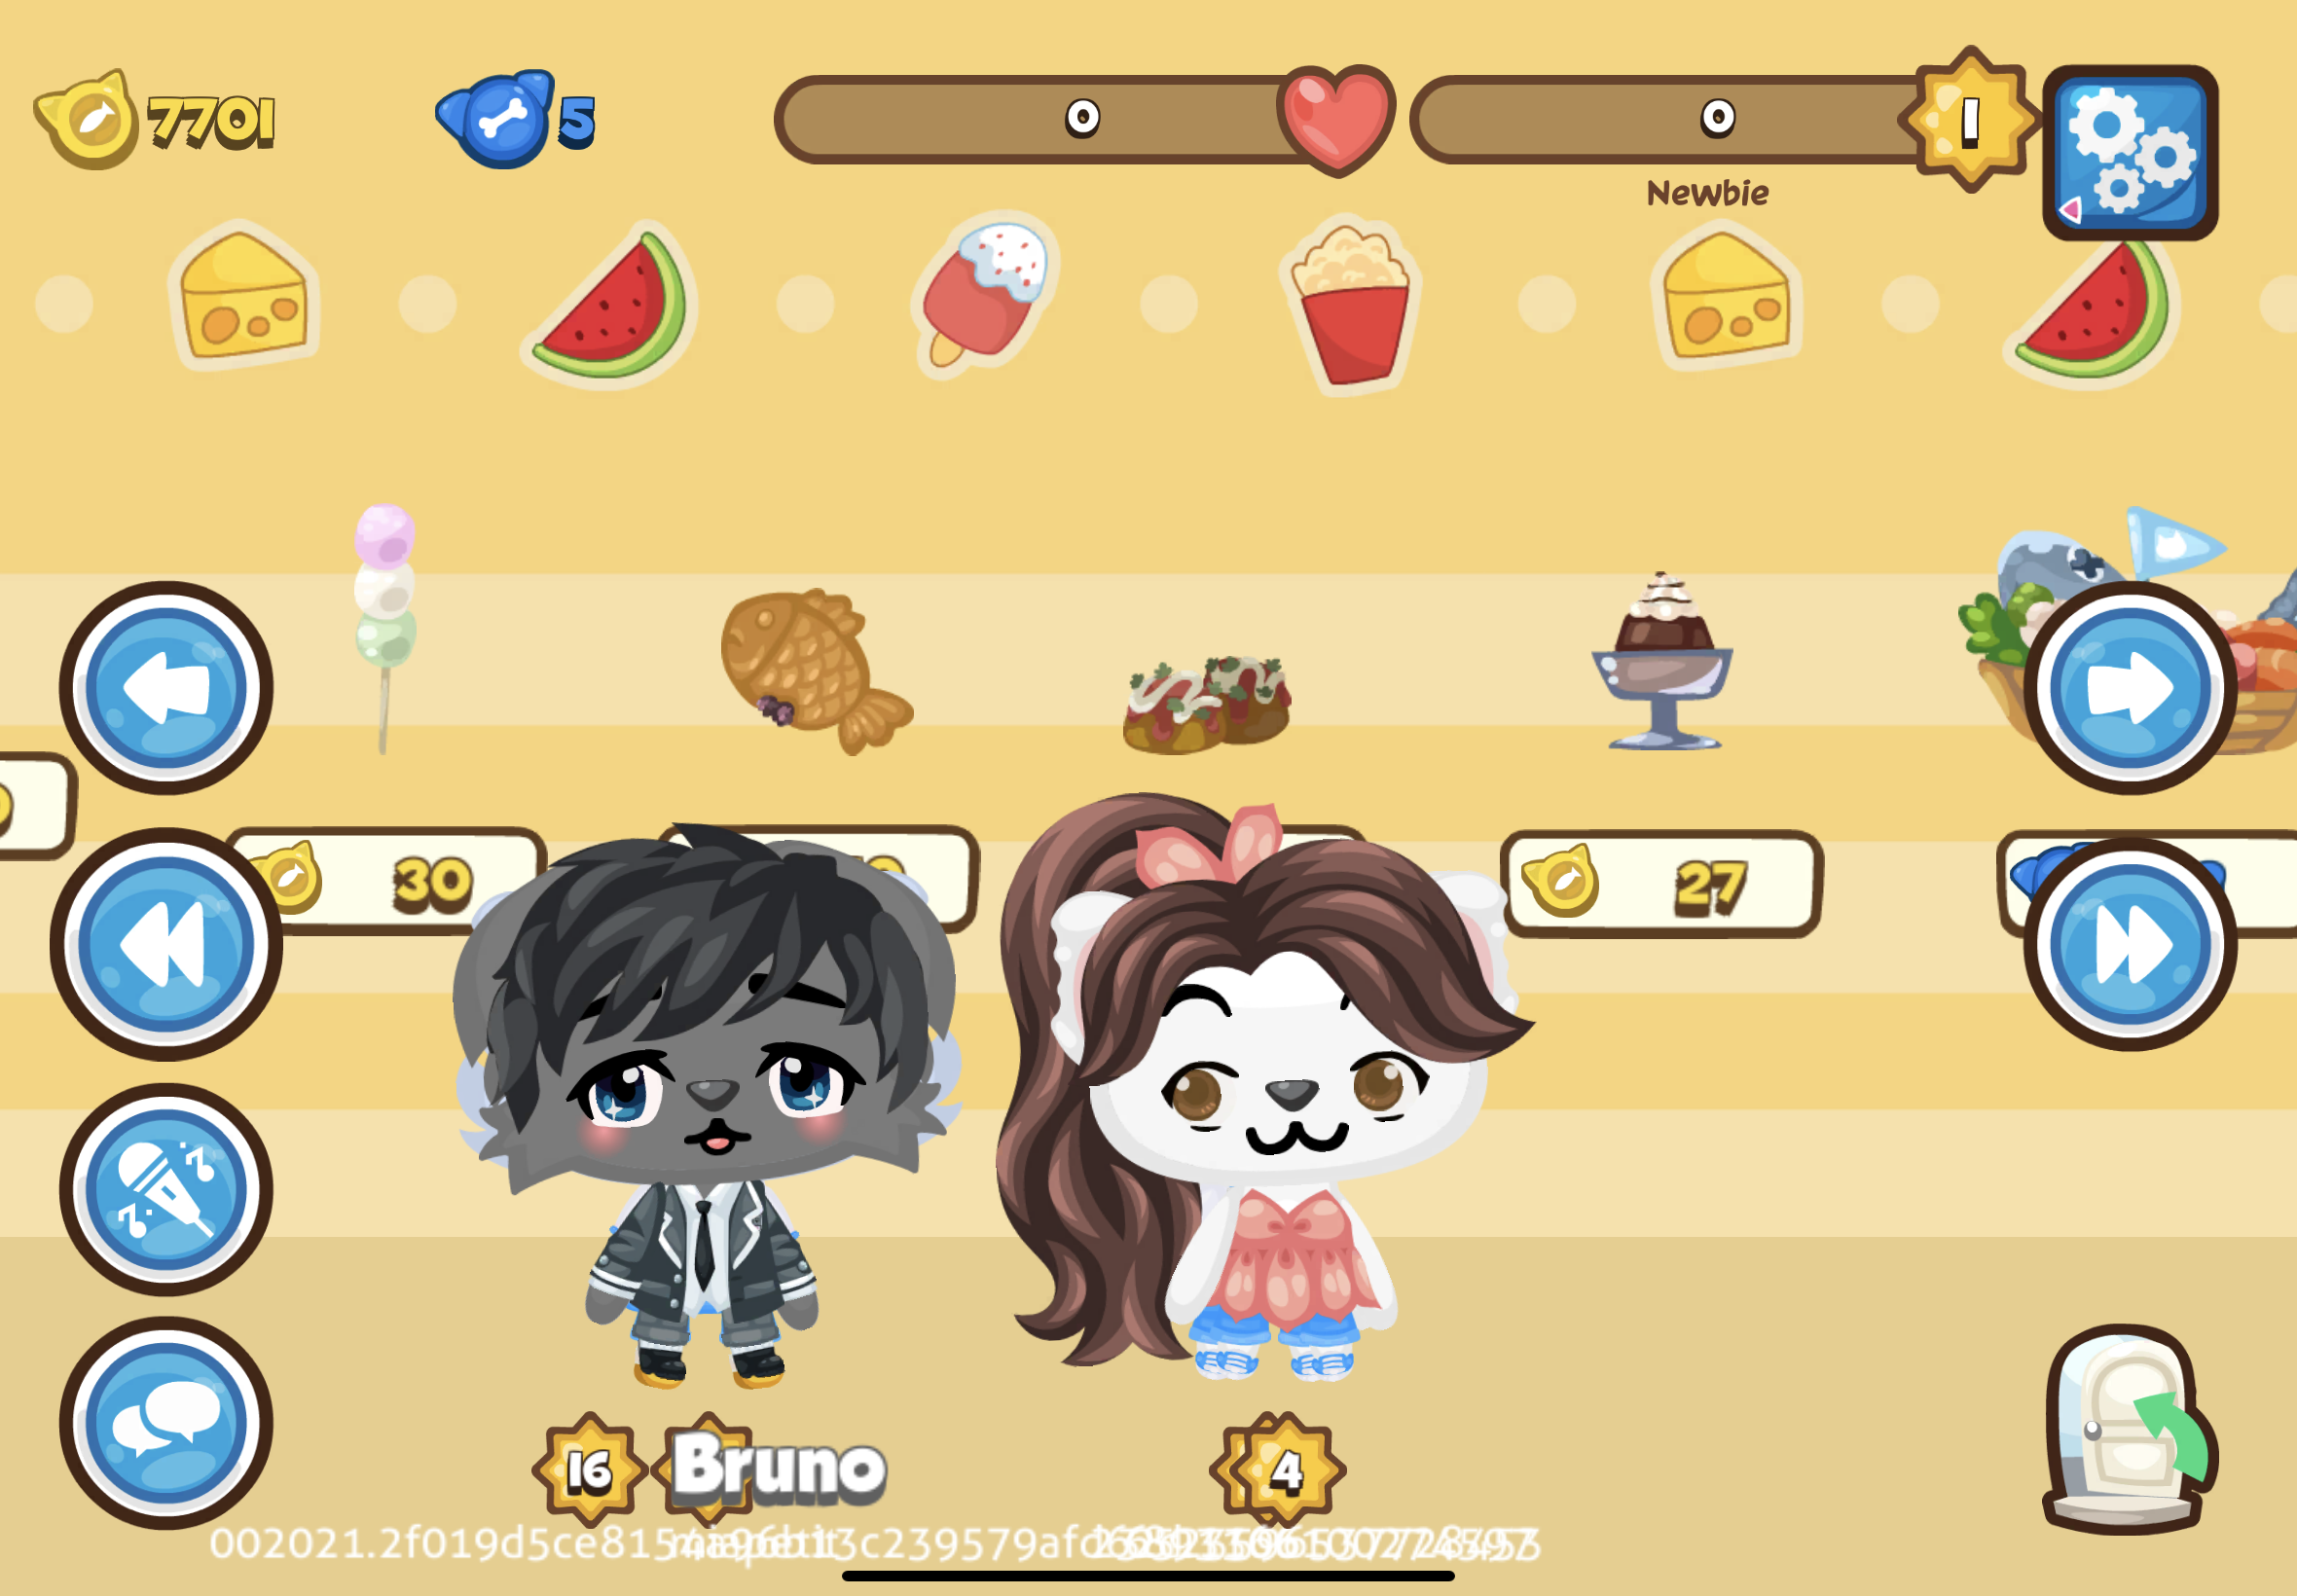 Pet Society Facebook game makes comeback, available on App Store